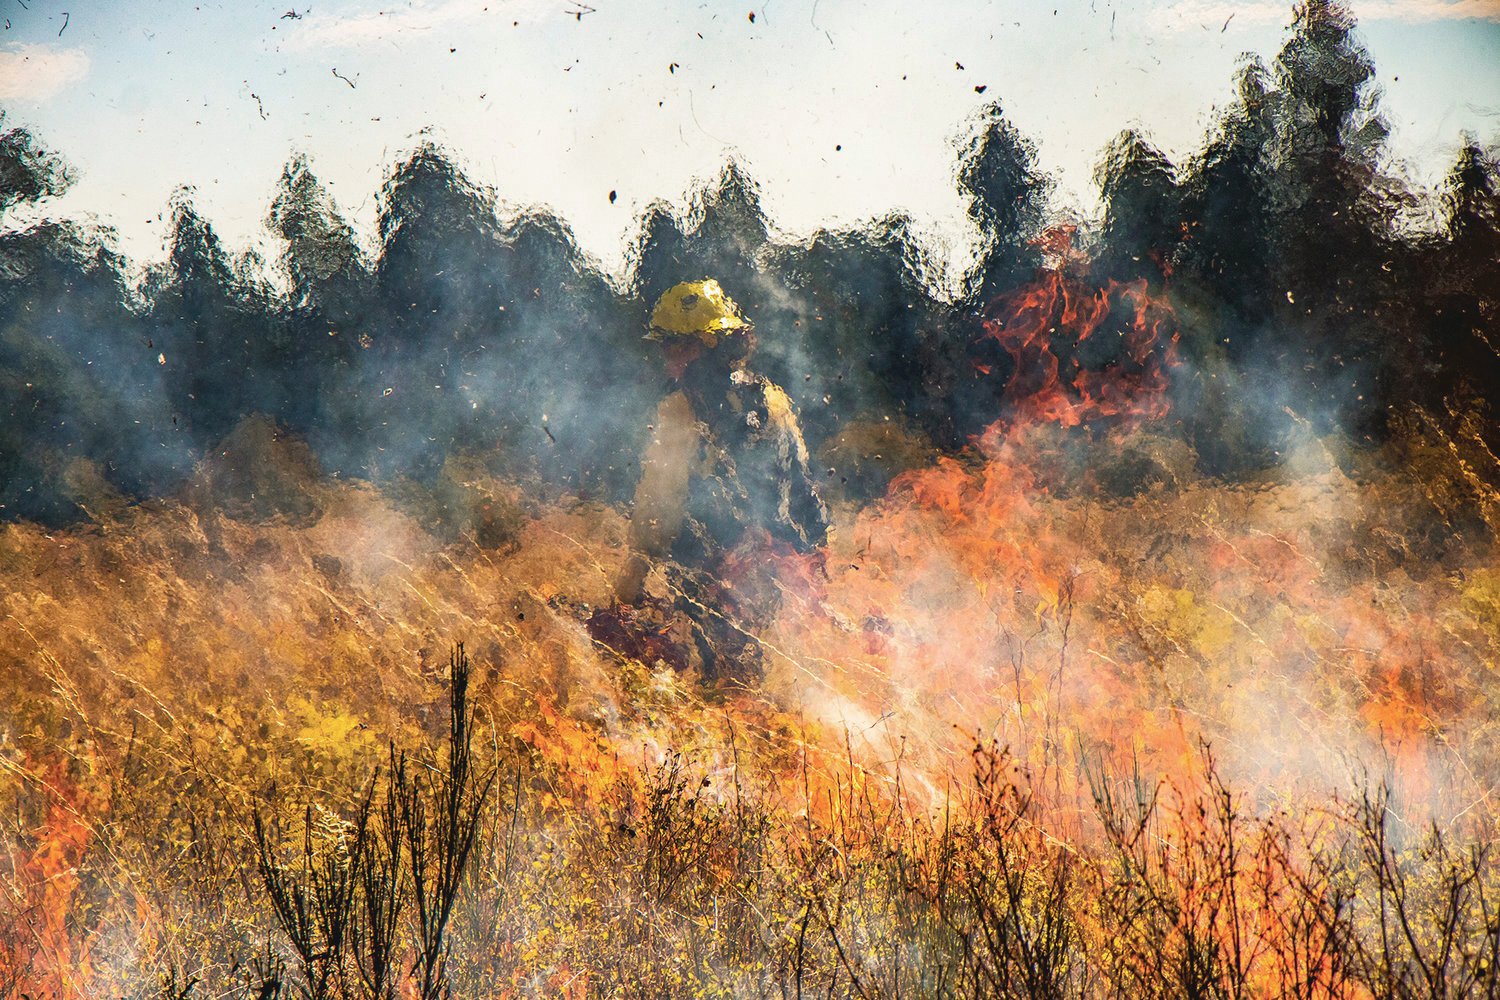 A Department of Natural Resource crew member walks behind flames during an ecological burn prescribed by the Center for Natural Lands Management in the Scatter Creek Wildlife Area near Grand Mound in this file photo.